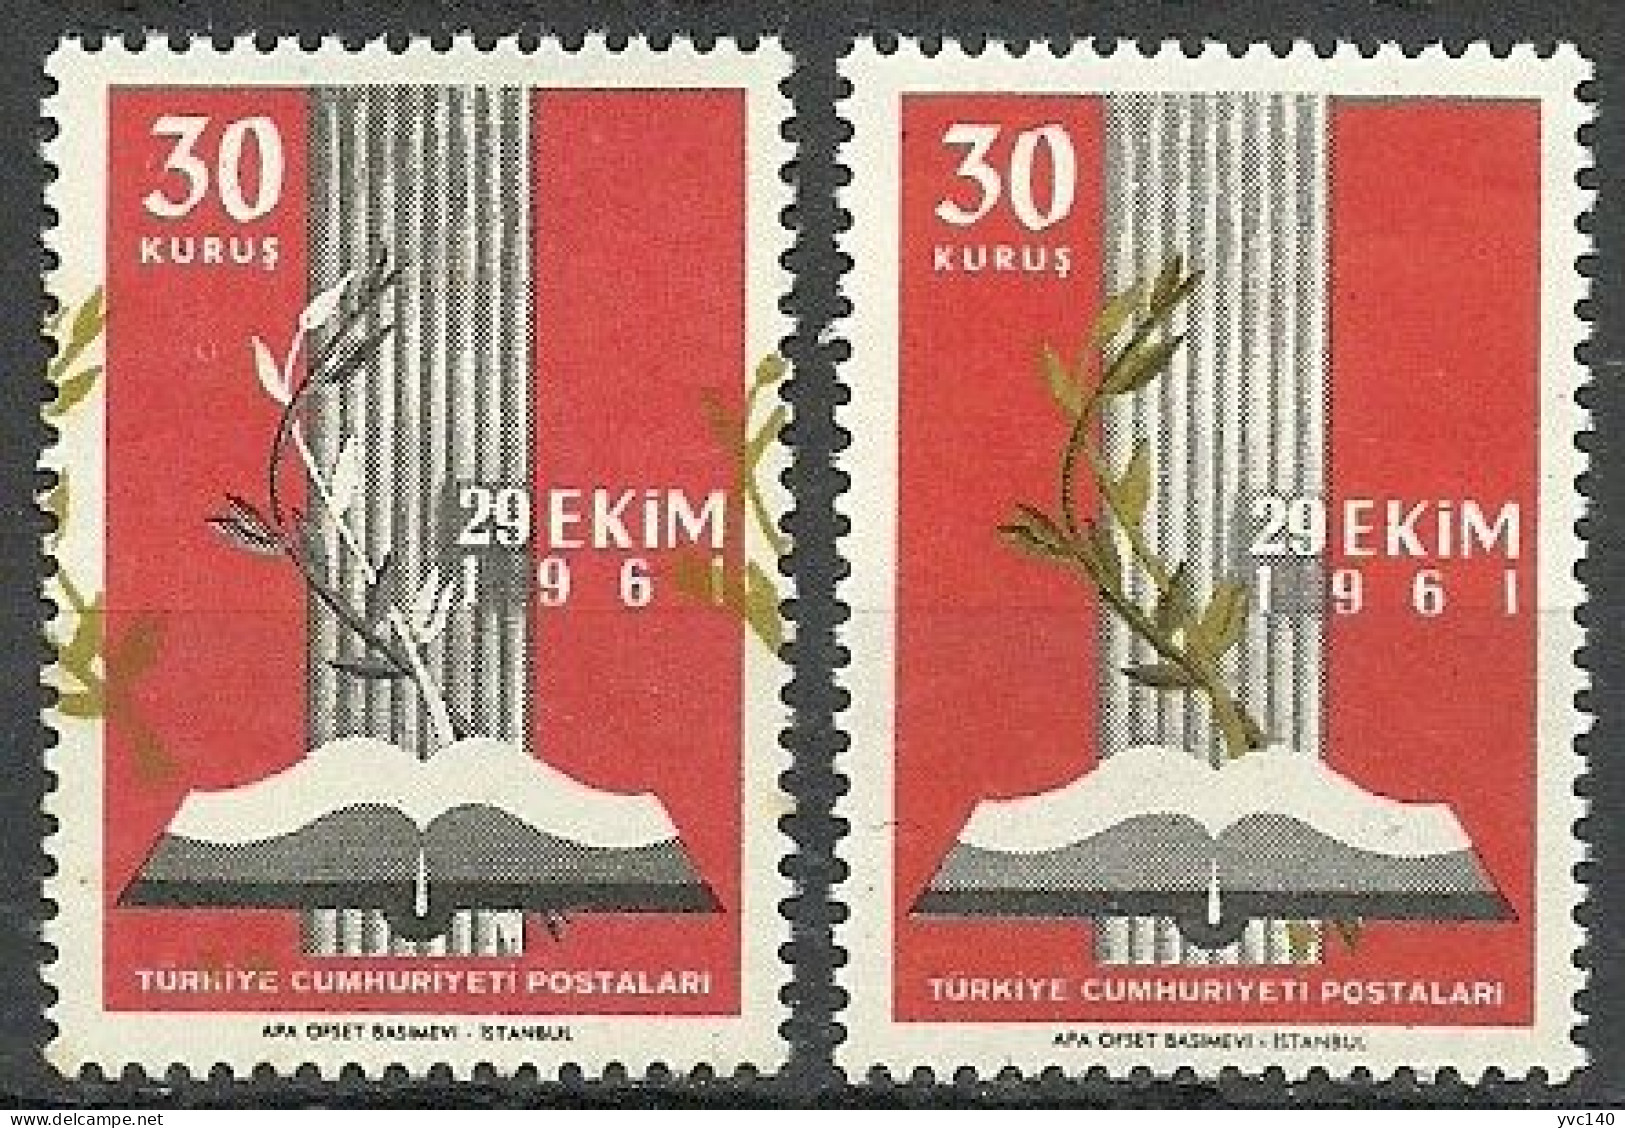 Turkey; 1961 Occasion Of The Inauguration Of The Turkish Parliement 30 K. ERROR "Shifted Print (Yellow Color)" - Ungebraucht